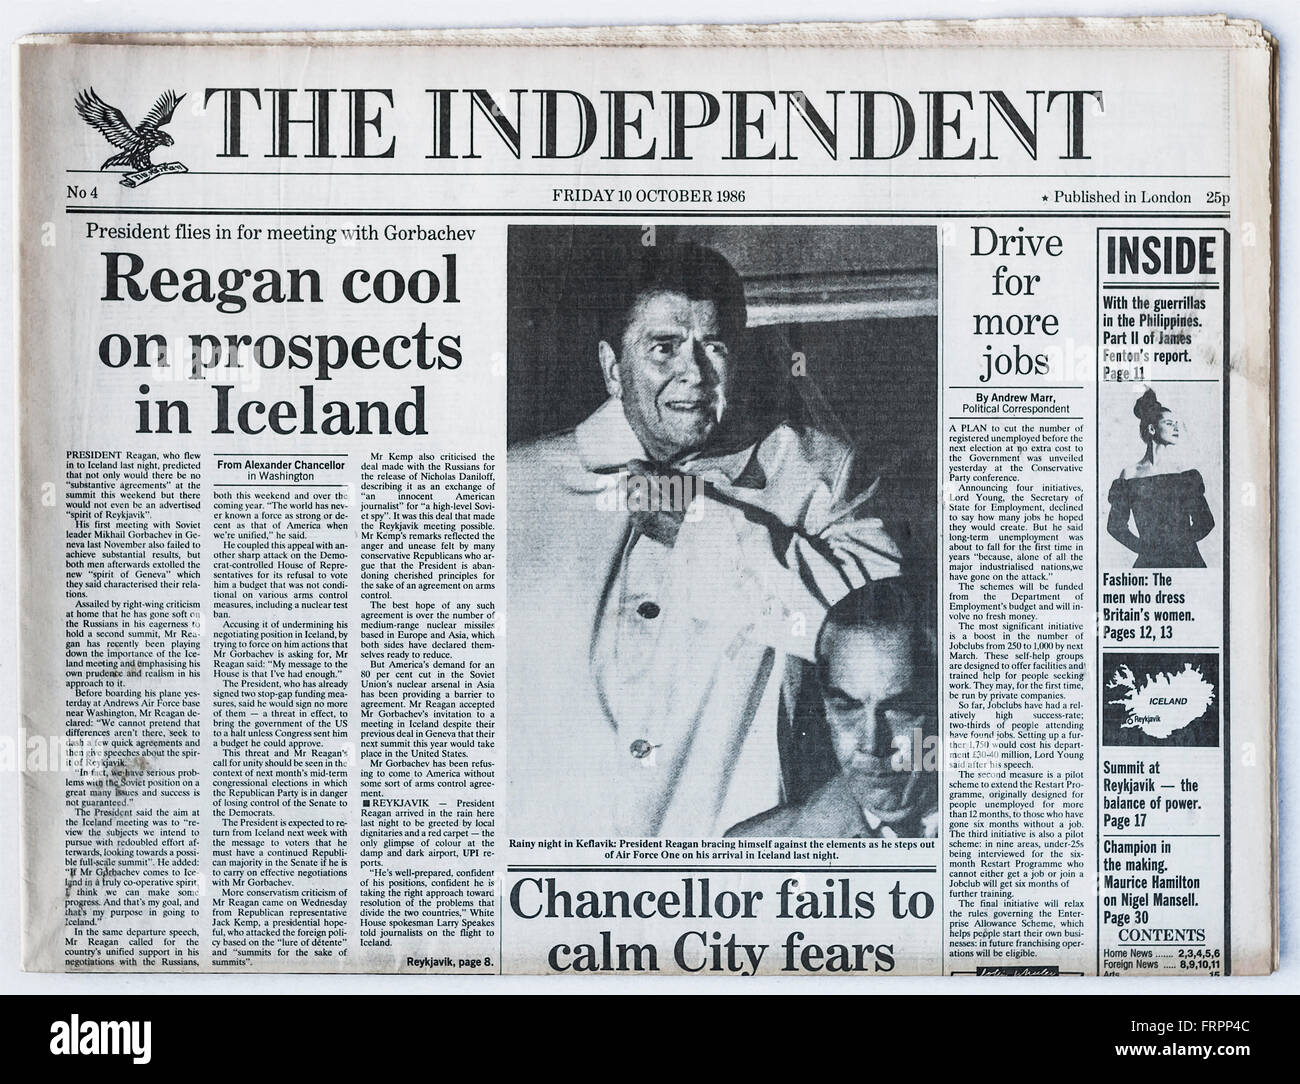 Upper front page Issue #4 'The Independent' UK national newspaper printed Friday 10th October 1986 - 'The Independent' is ceasing in print form on Saturday 26th March 2016 after close to 30 years publication. Credit:  Ed Buziak/Alamy Live News Stock Photo